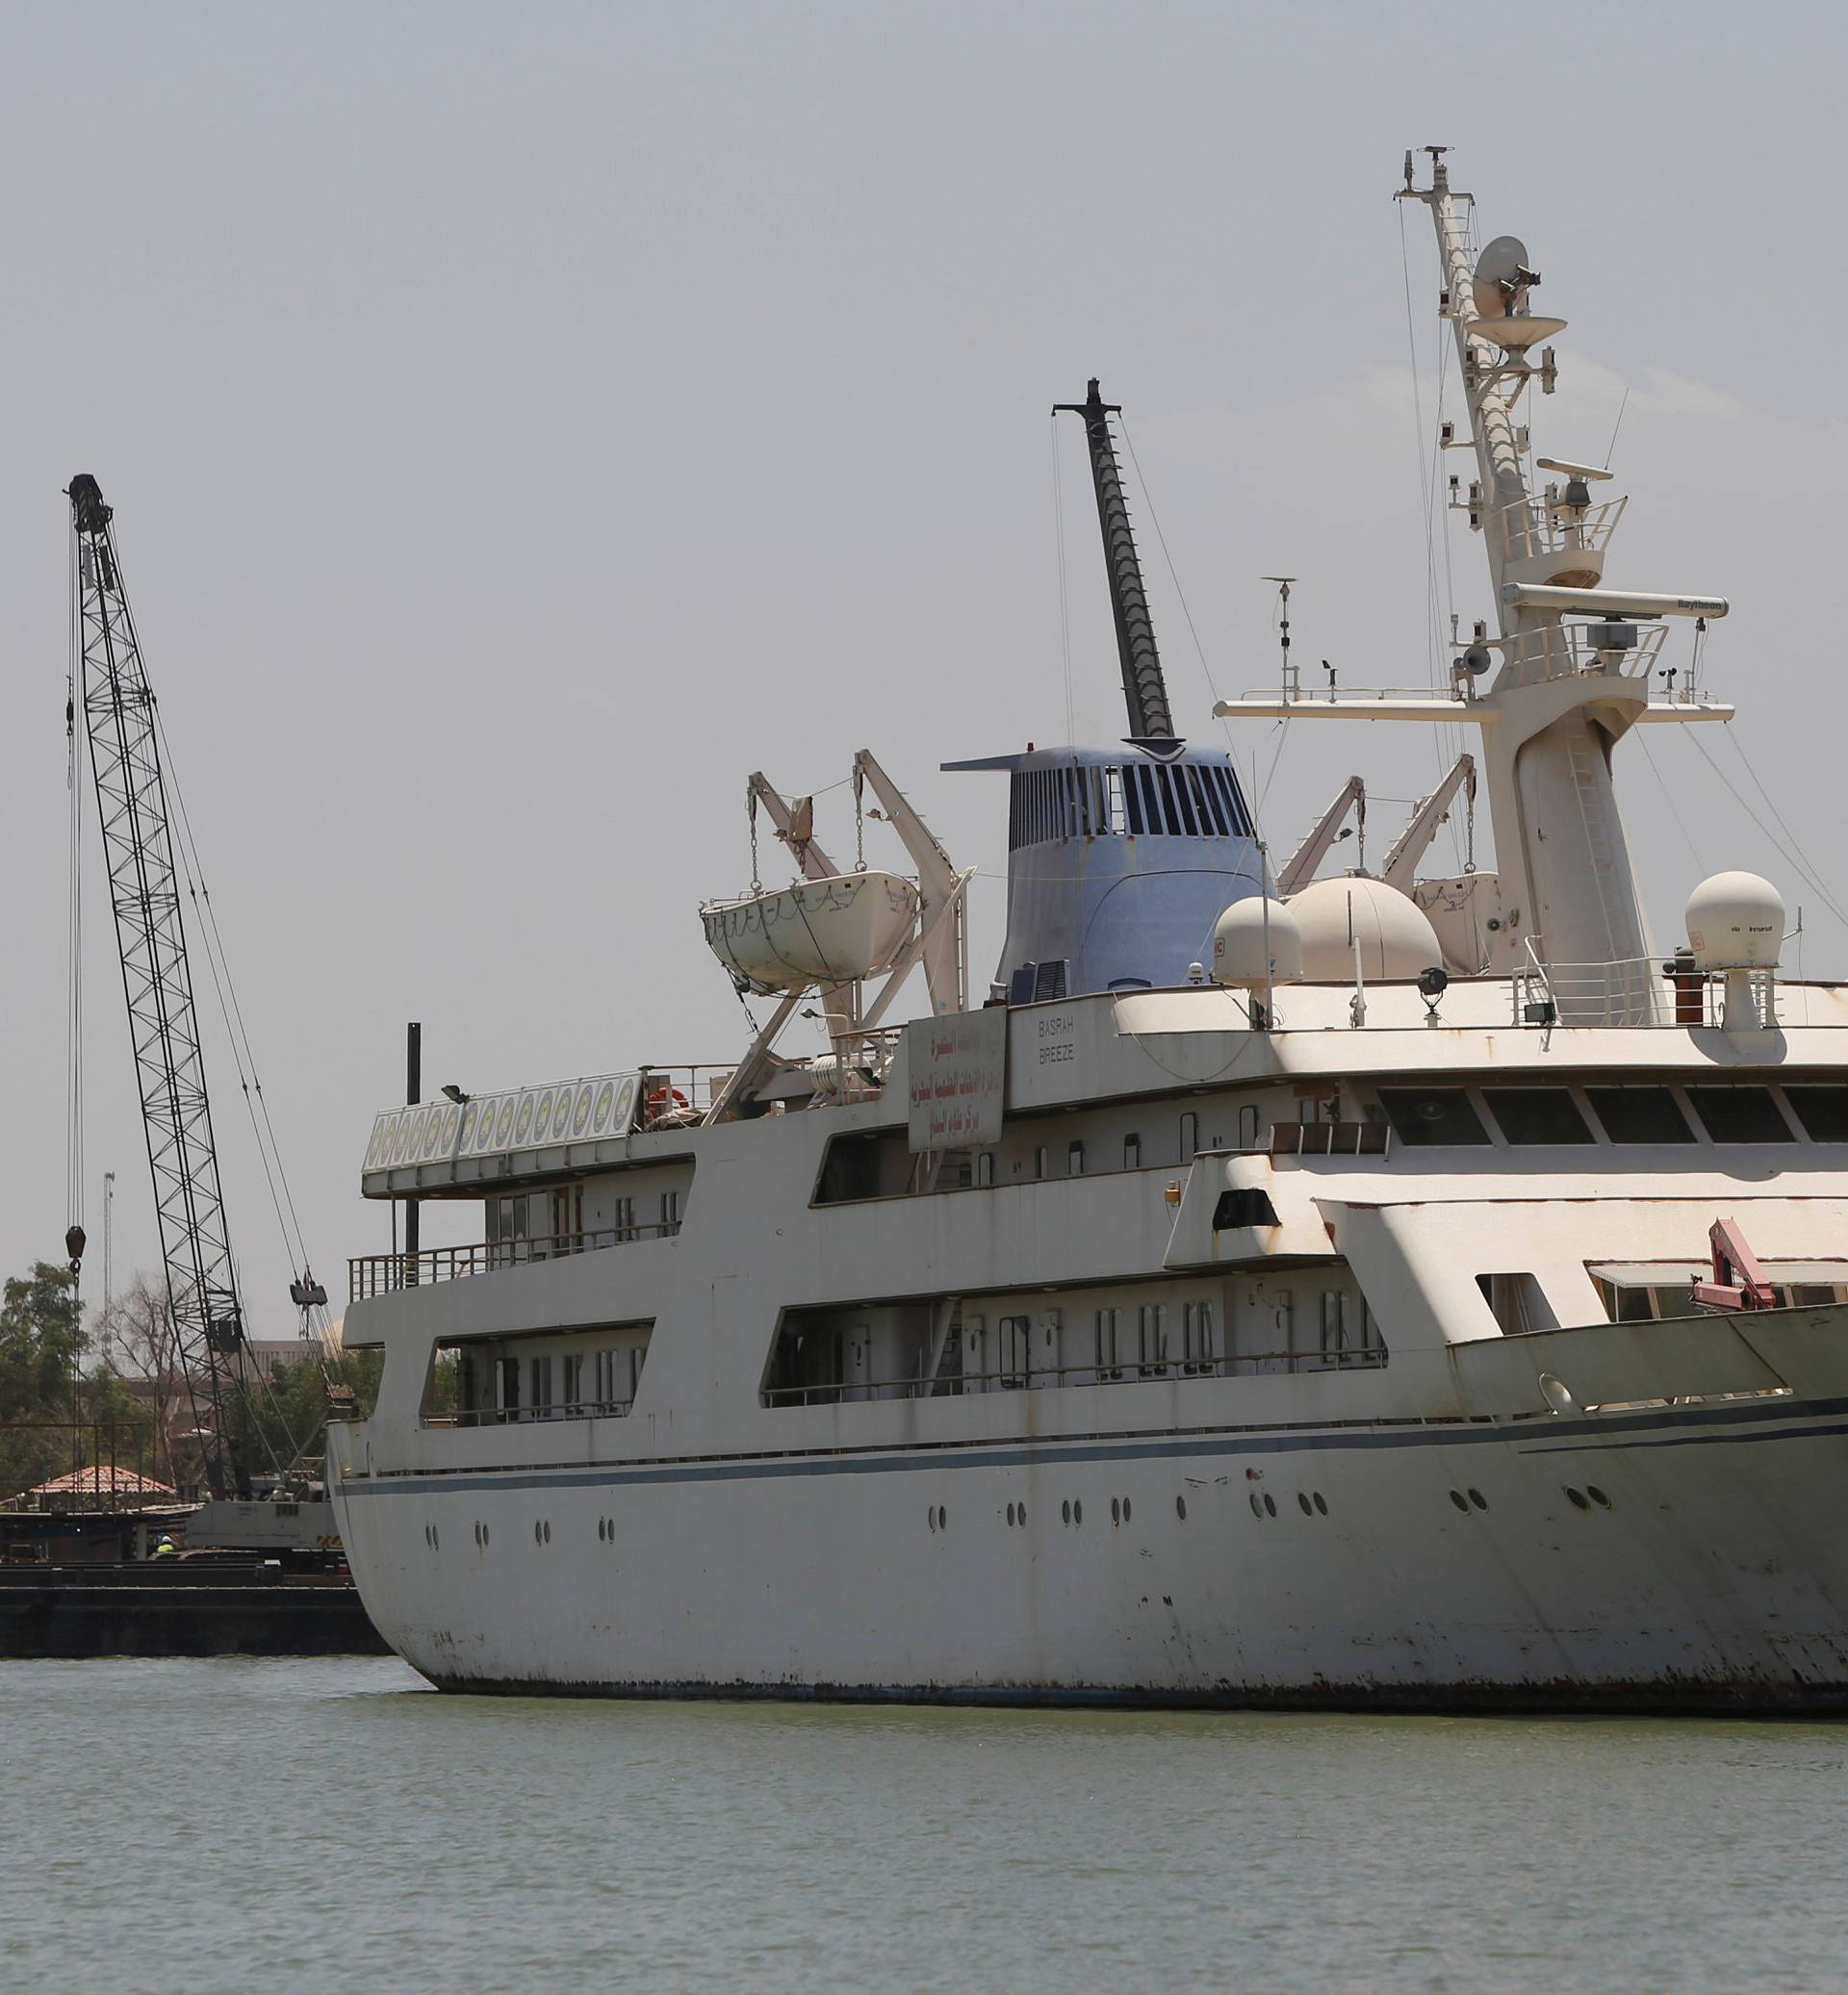 Yacht called "Basrah Breeze", once owned by former Iraqi president Saddam Hussein, who was toppled in a U.S.-led invasion in 2003, is seen in the southern port of Basra